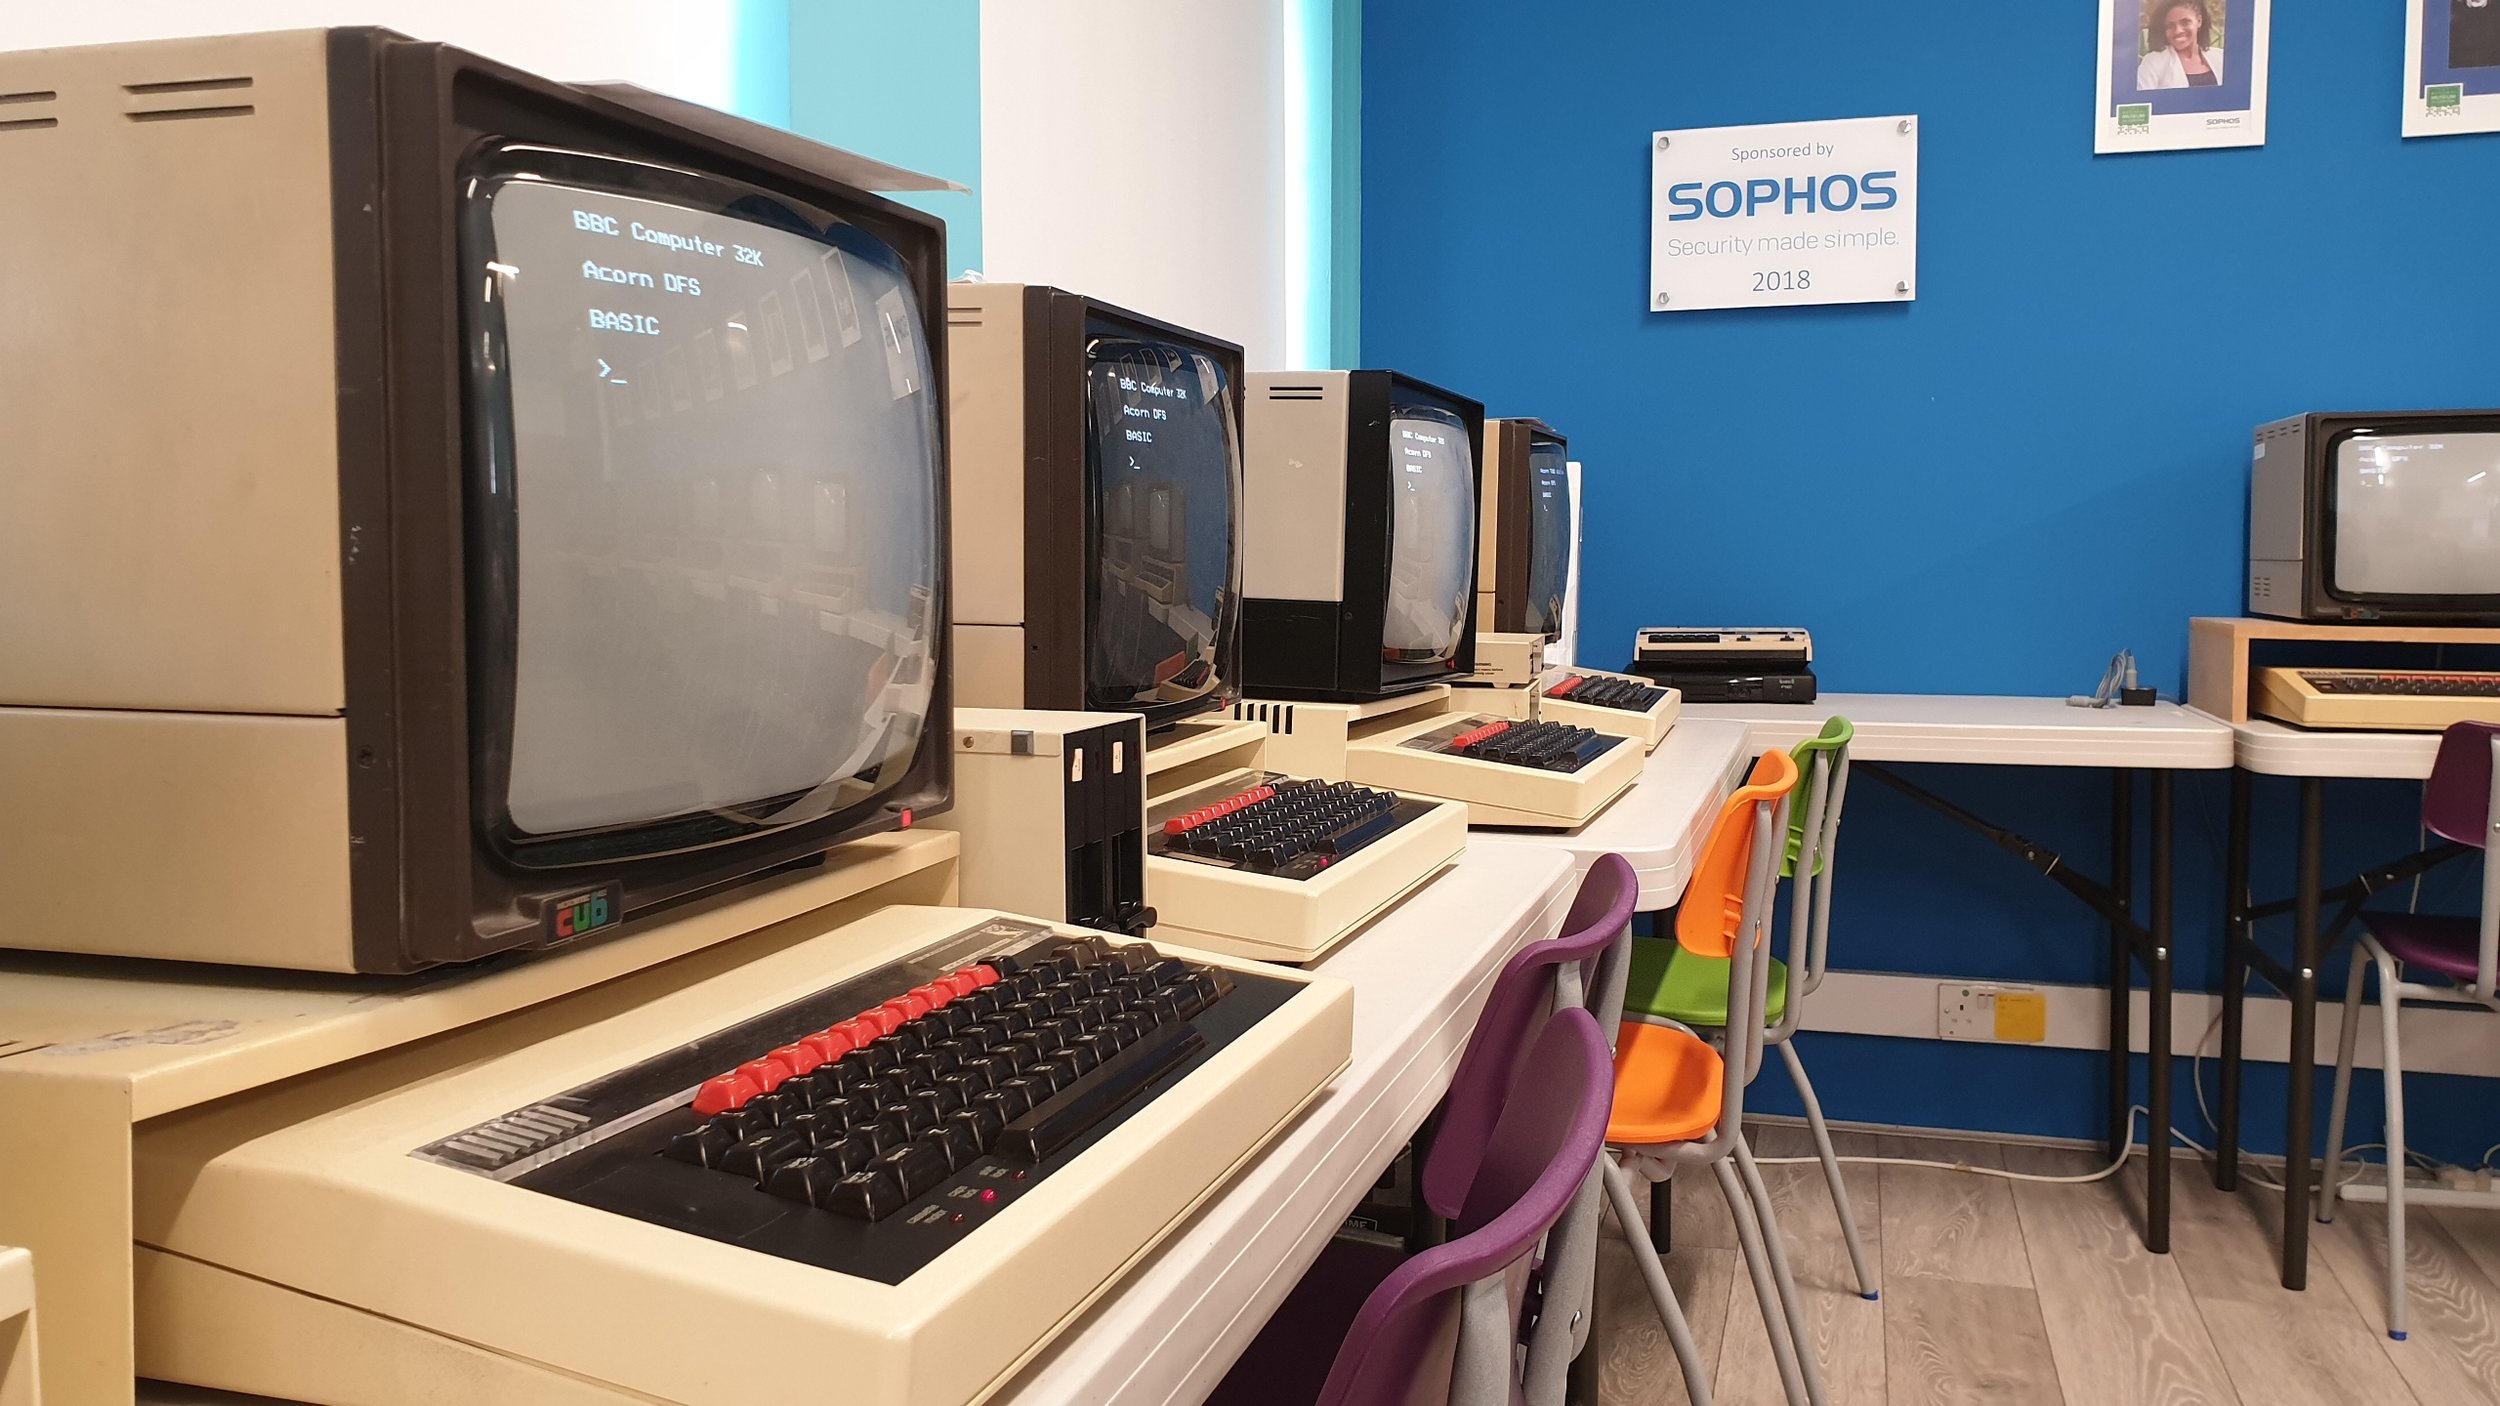 The Classroom — The National Museum of Computing